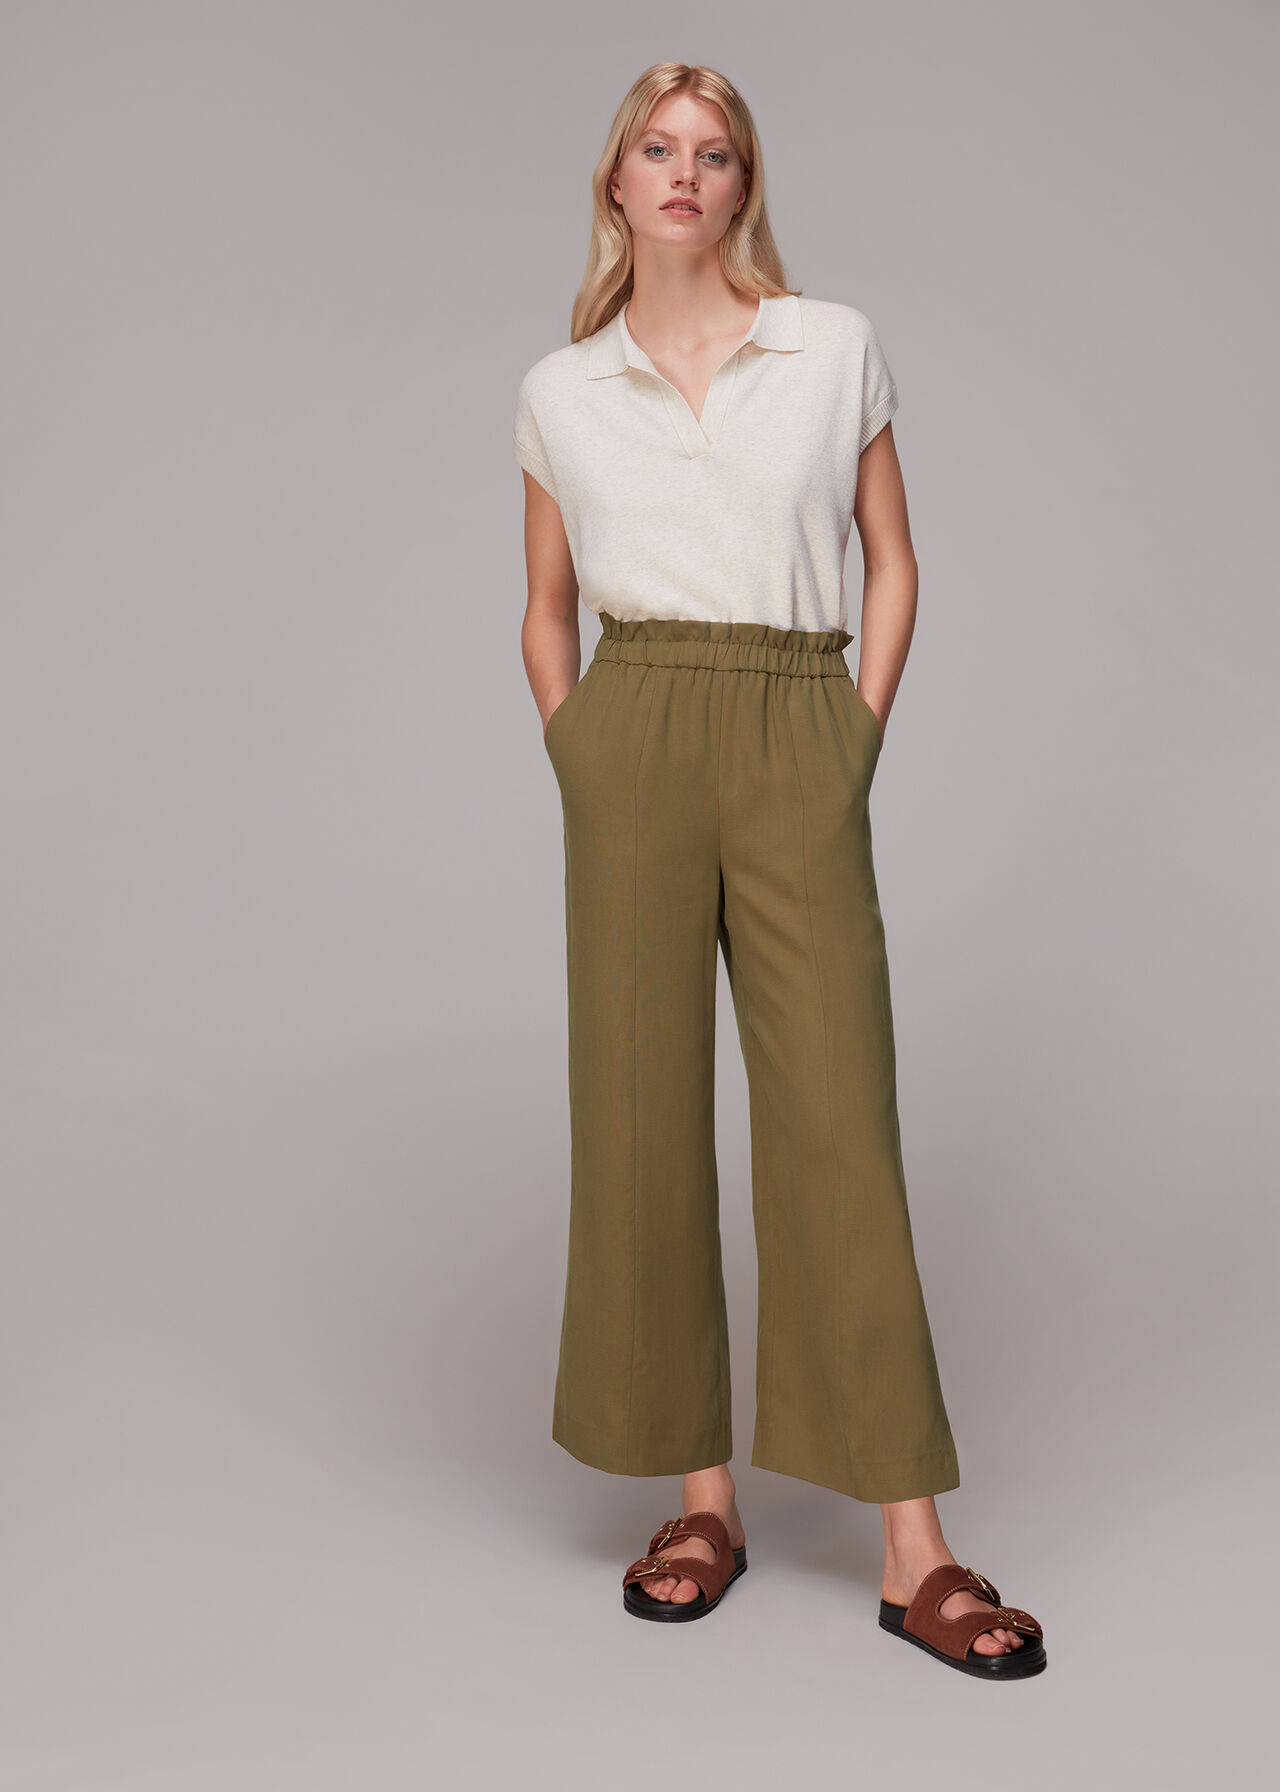 Olive Grace Elasticated Trouser, WHISTLES